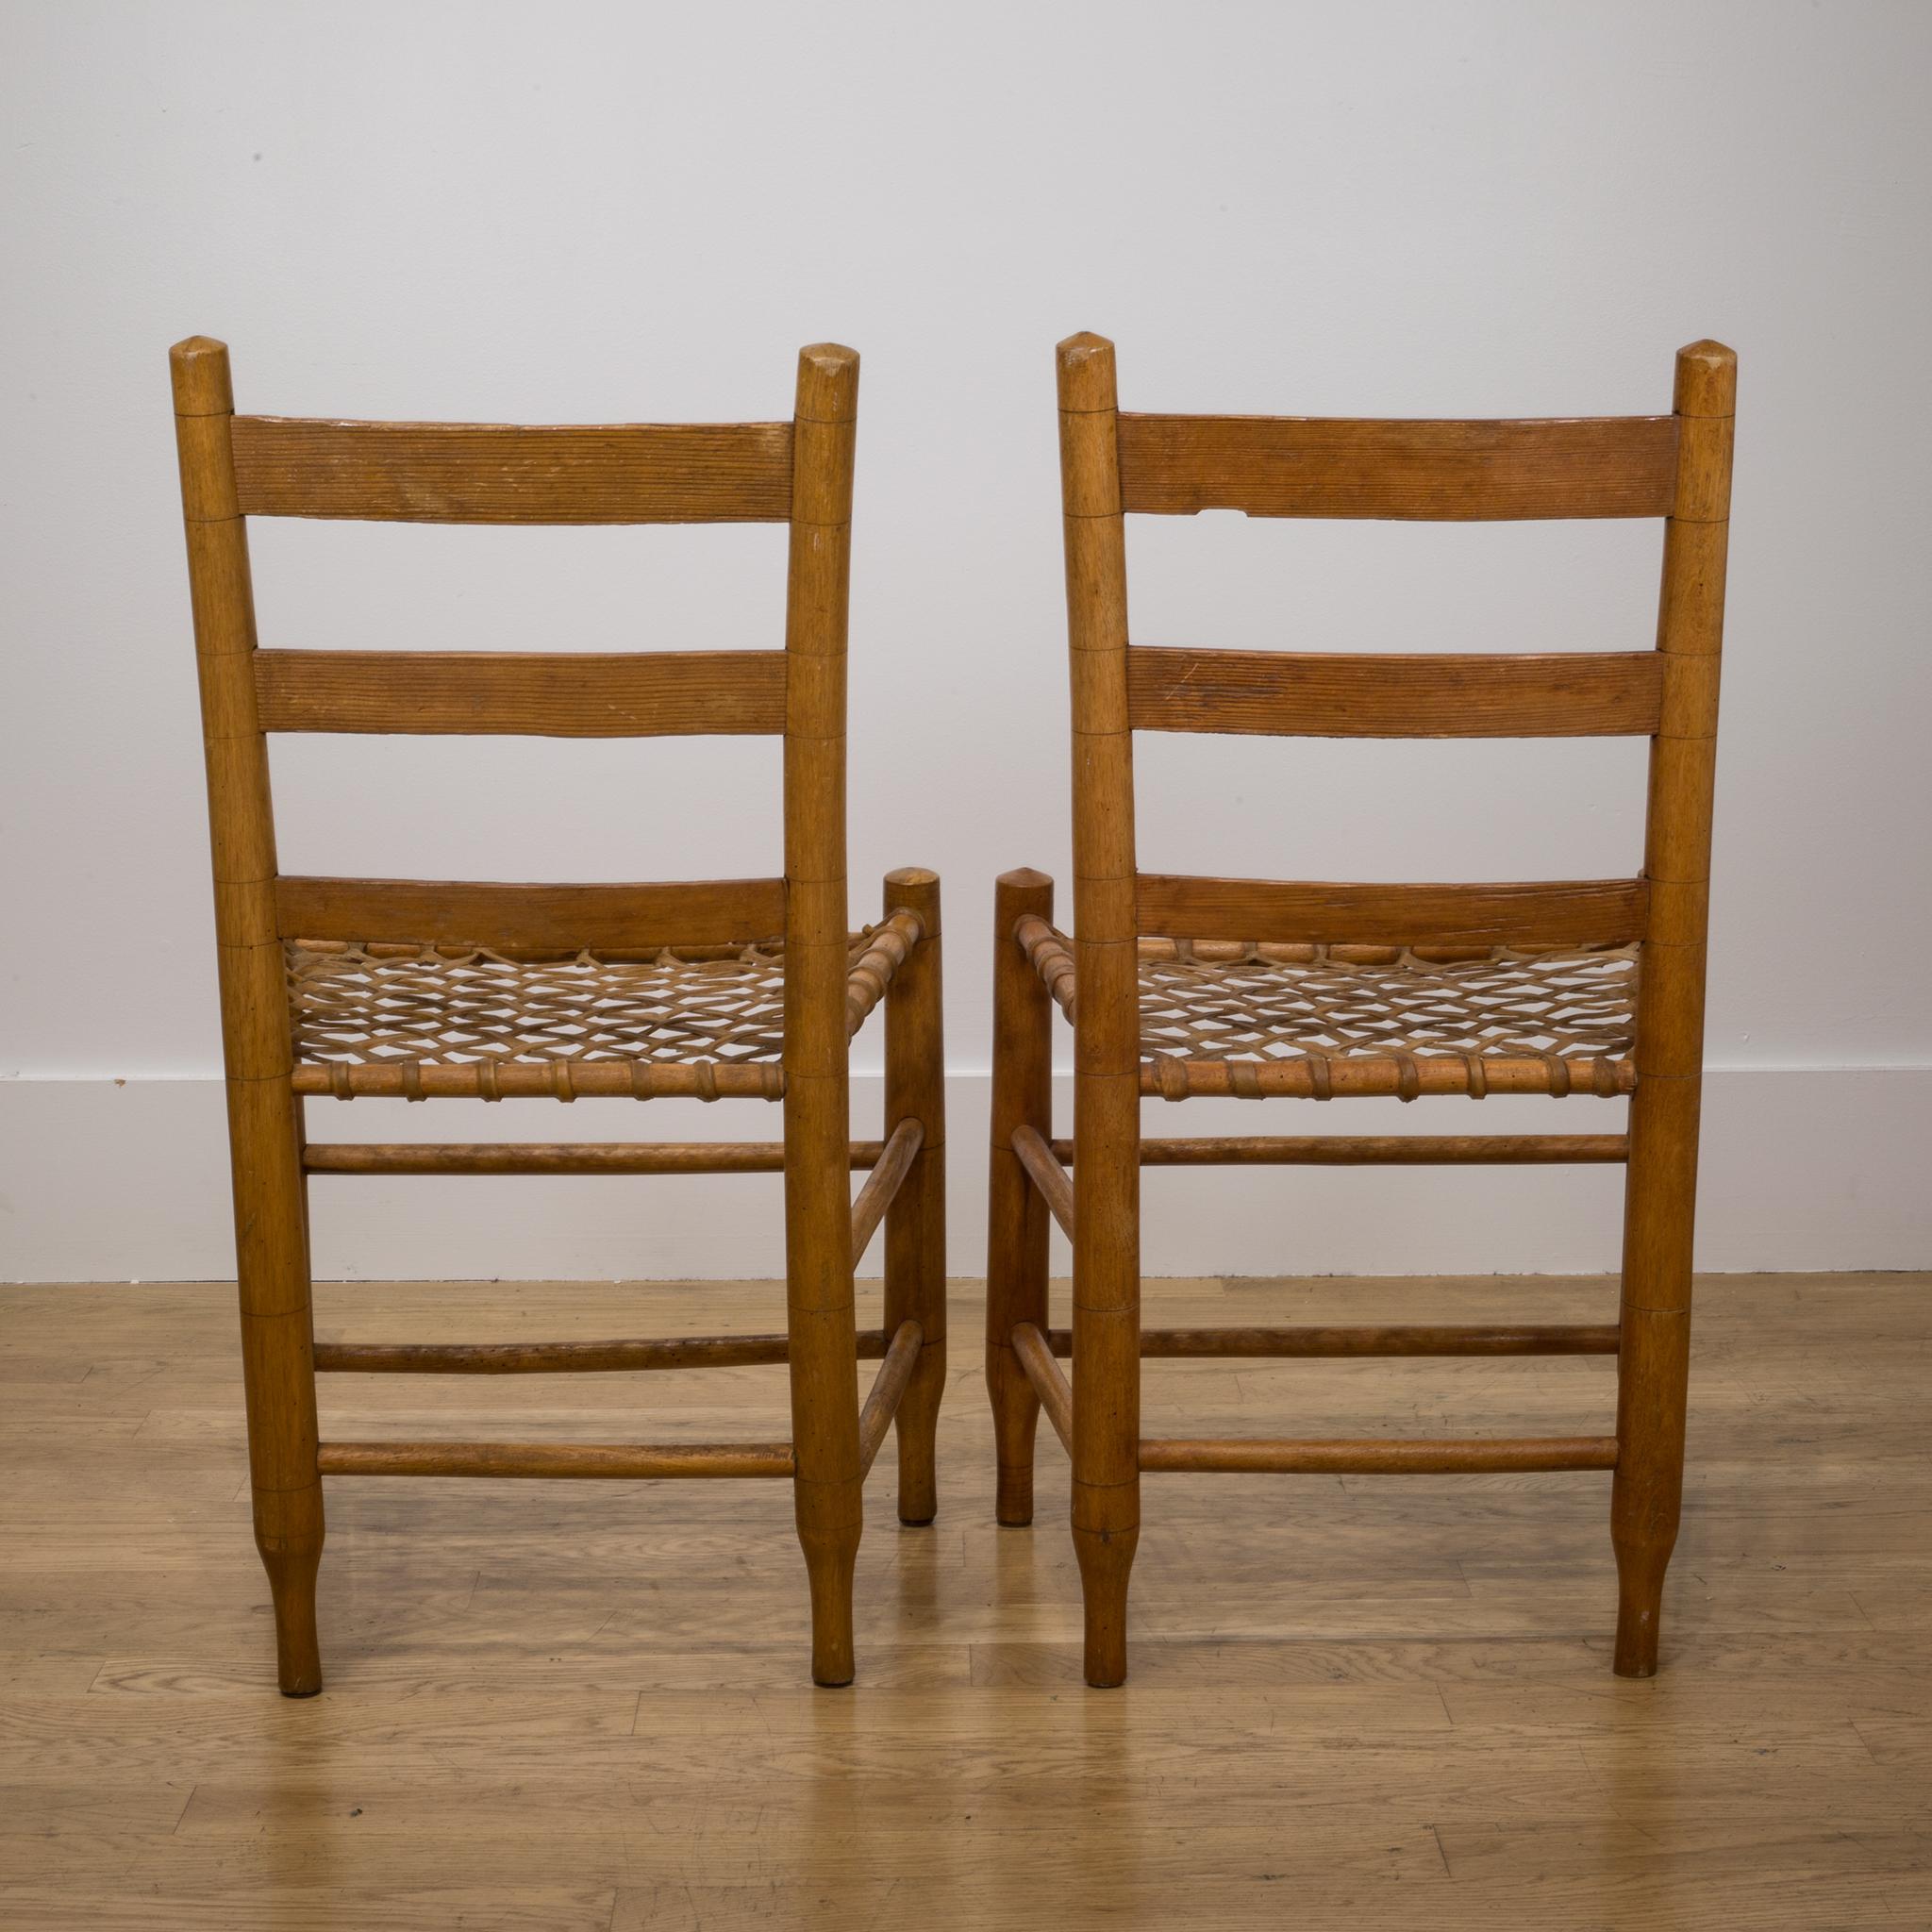 19th c. Handmade Wood/Rawhide Chairs from Historic  Oregon Commune c. 1856-1866 2